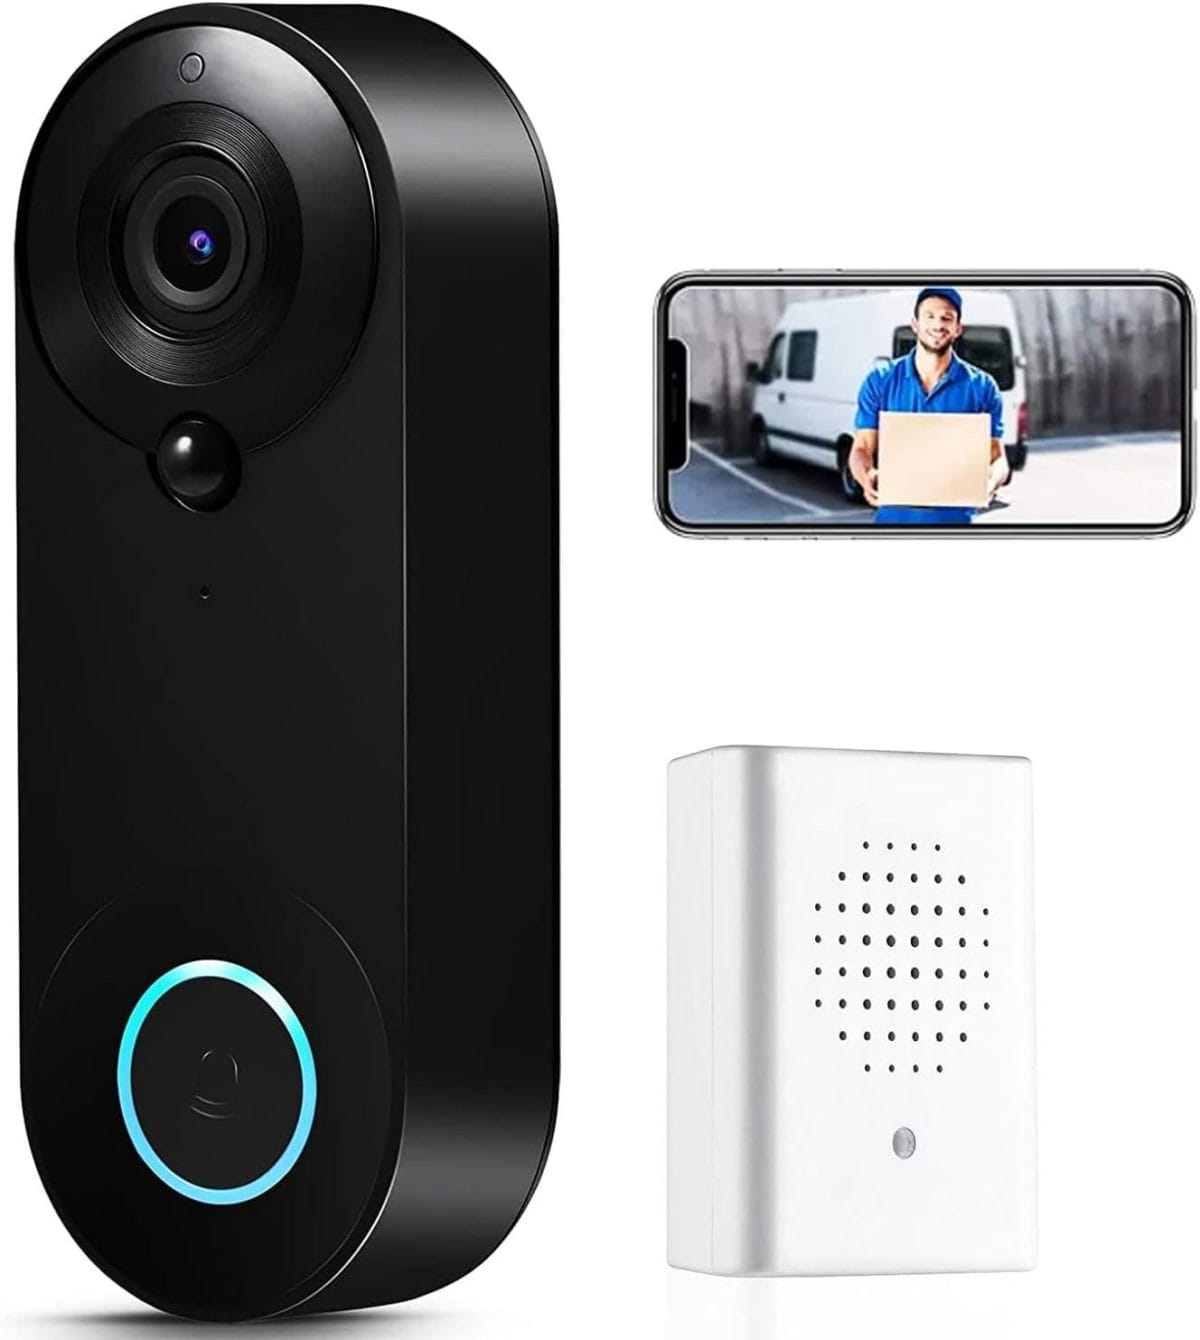 TSOGIA Doorbell Camera Wireless, 1080P HD WiFi Video Doorbell with Chime, Motion Detector, Night Vision, Cloud Storage, 2-Way Audio, Rechargeable Wireless Doorbell for Home